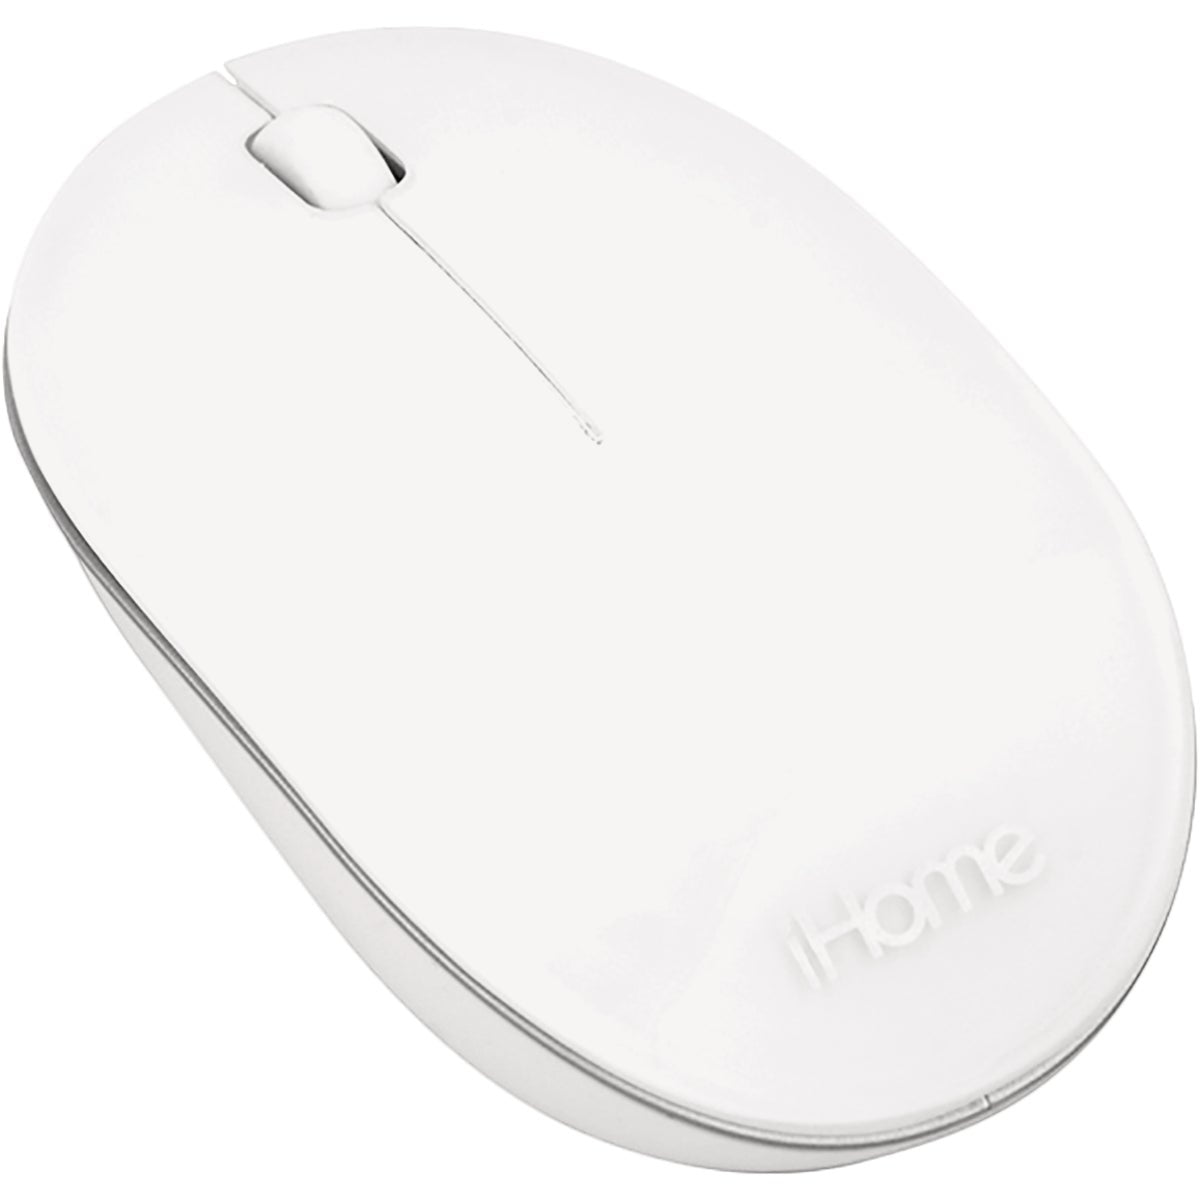 ihome mouse not working on mac